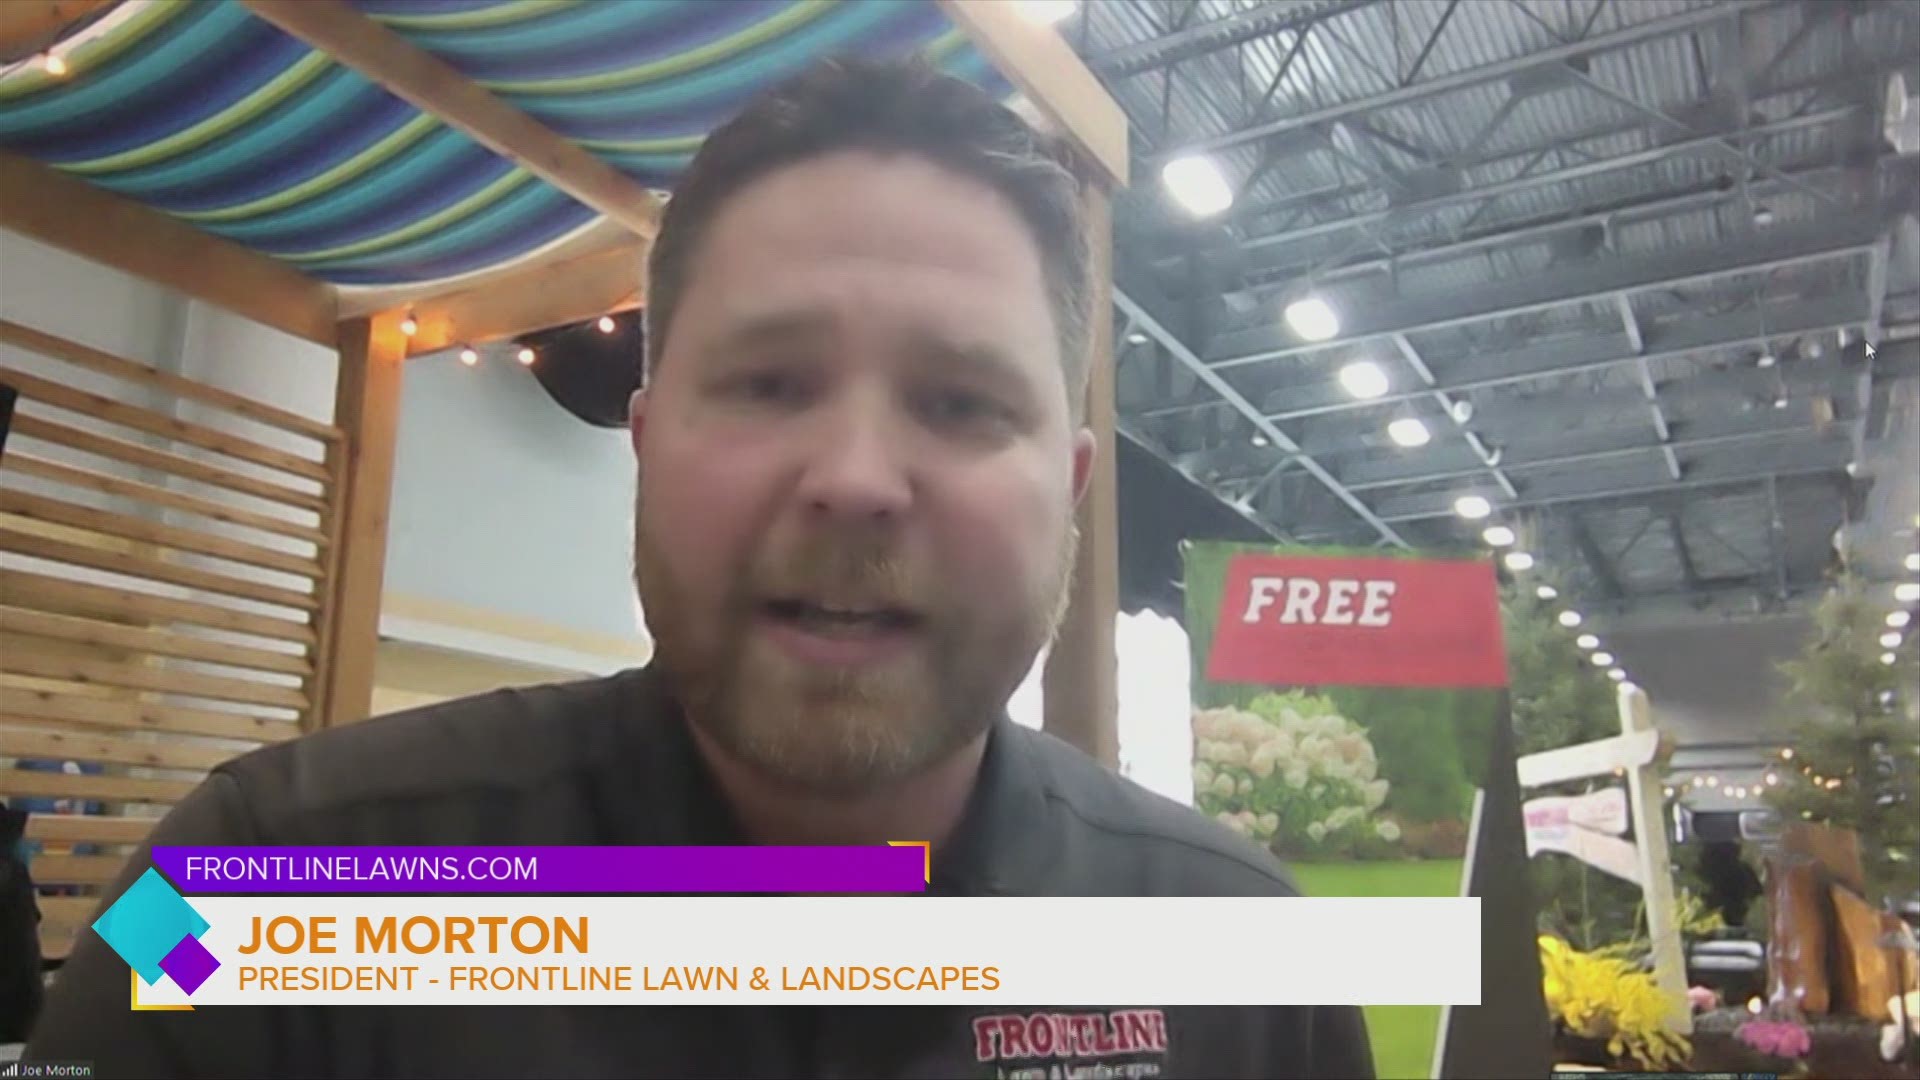 Frontline Lawn & Landscapes is one of the feature gardens at the Des Moines Home + Garden Show and will have experts on hand | PAID CONTENT